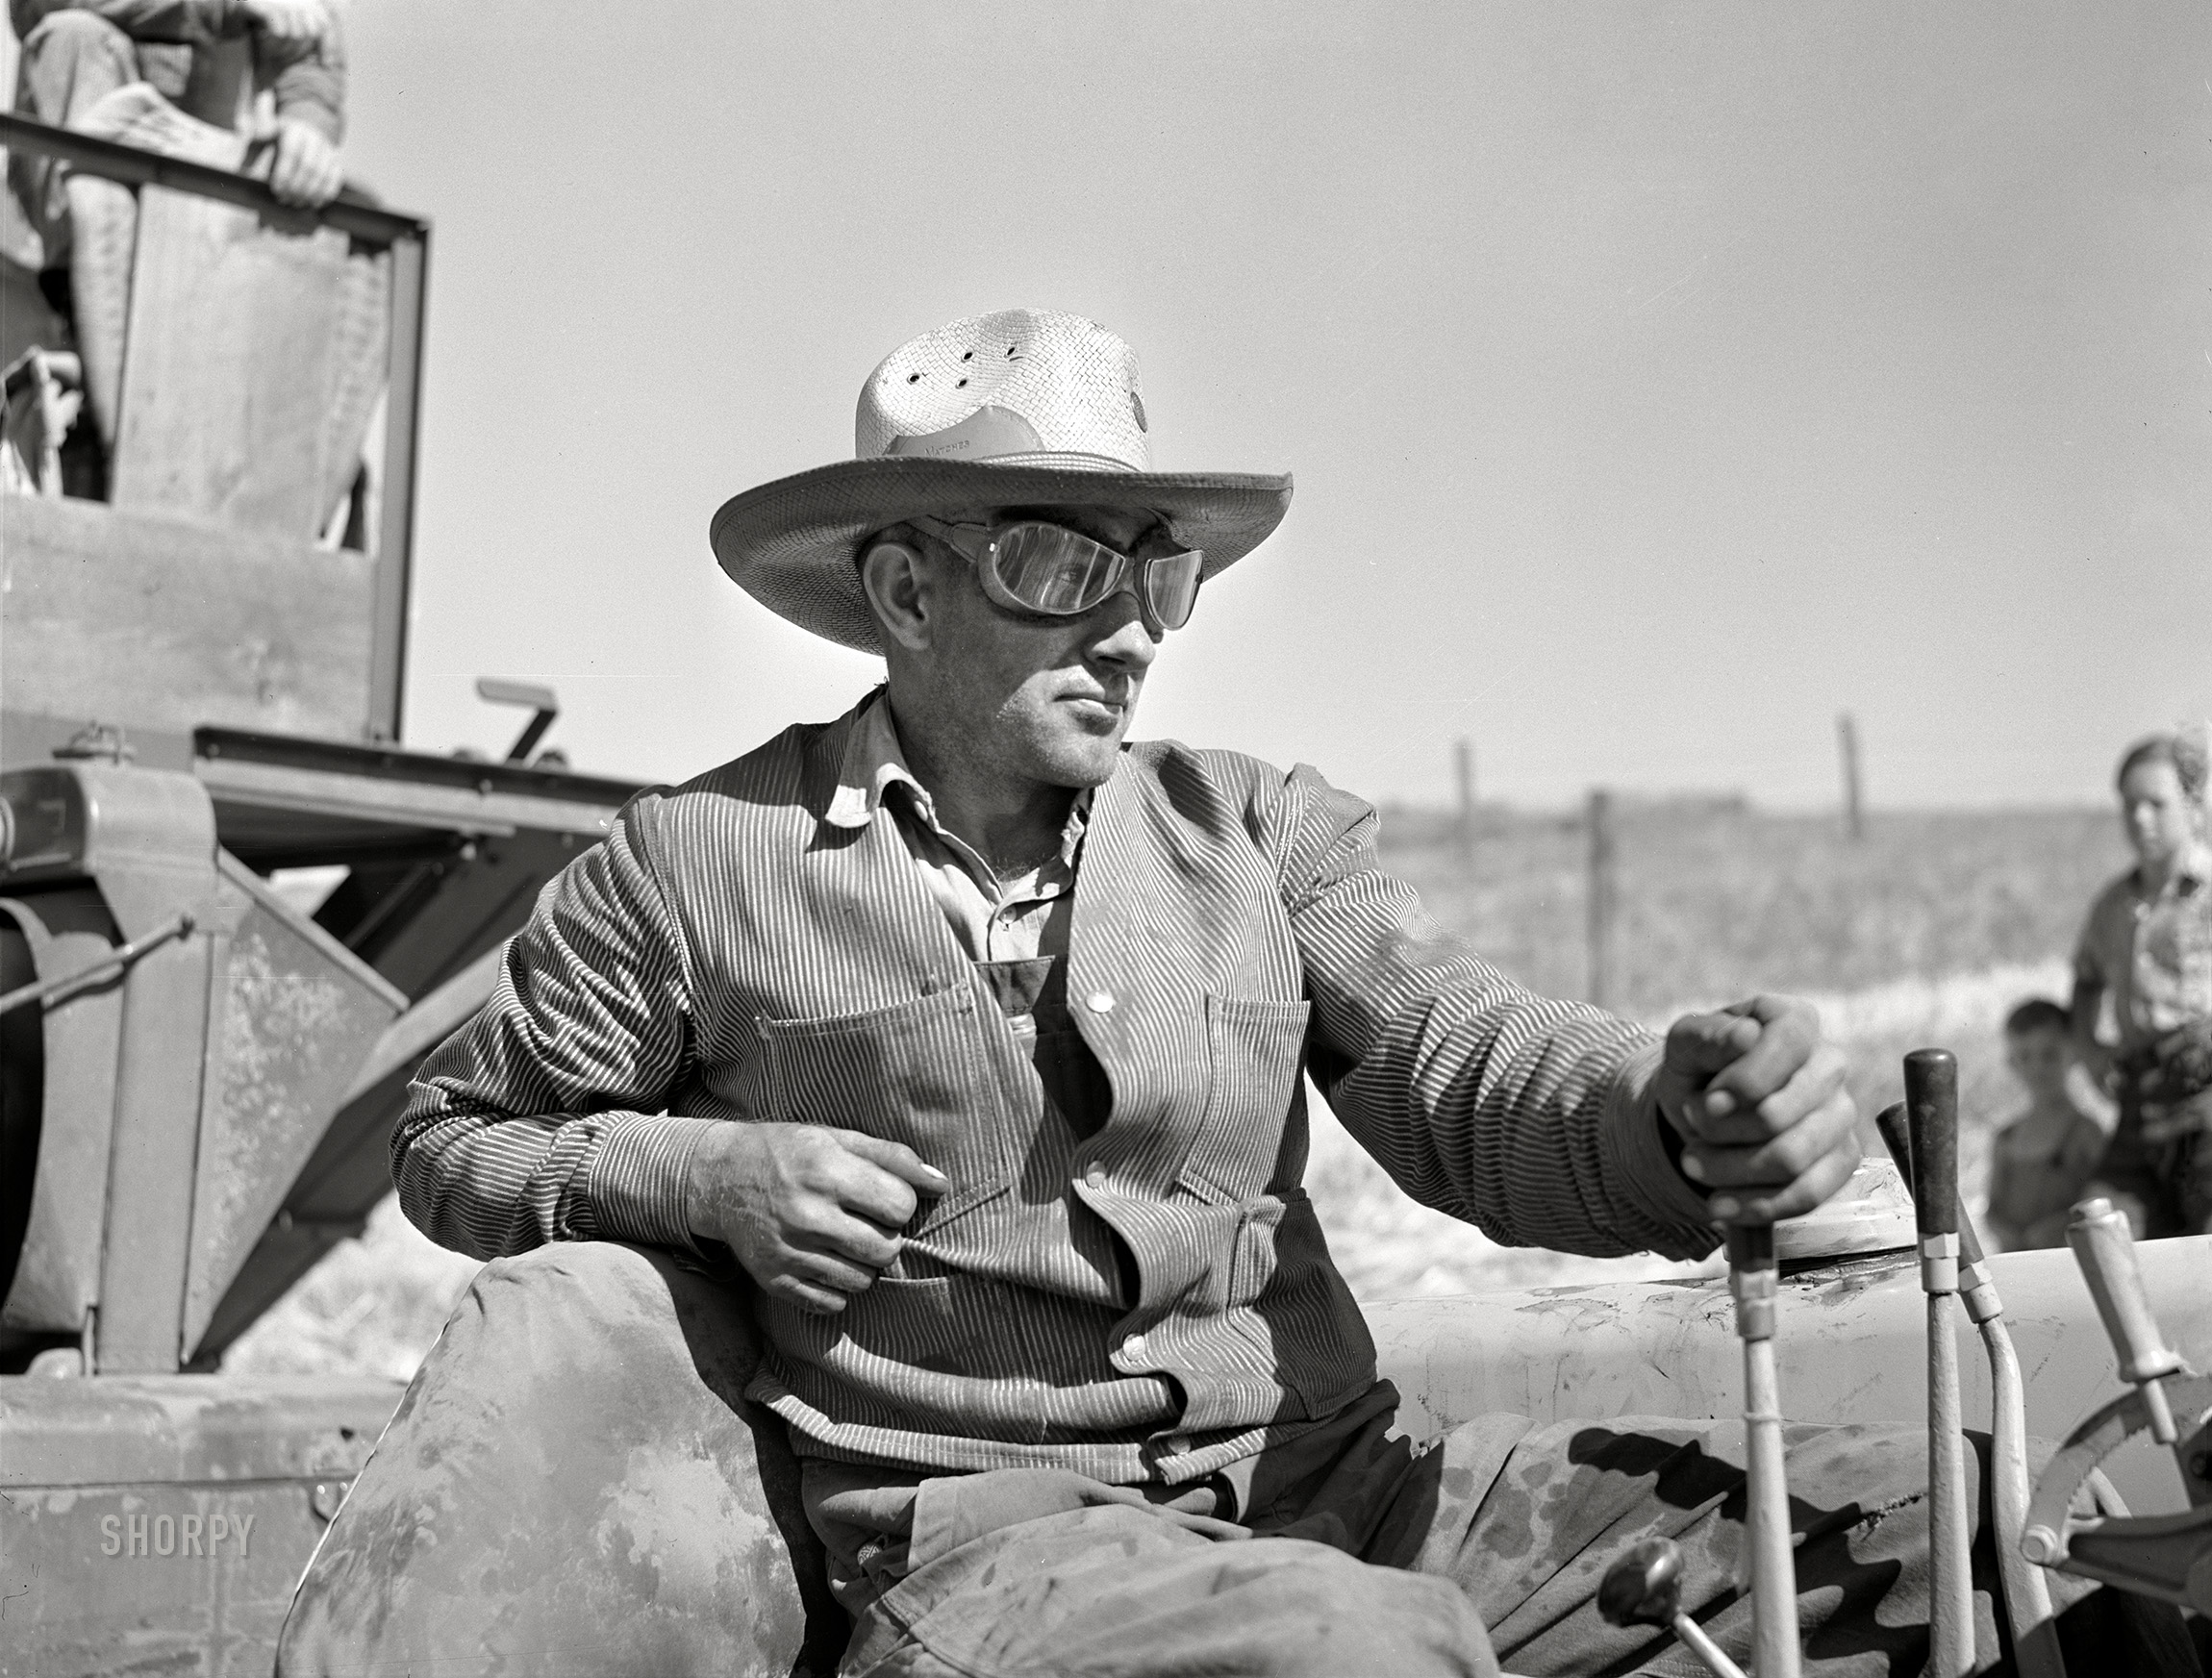 July 1941. "Driver of caterpillar tractor which draws combine in wheat fields of Whitman County, Washington." Photo by Russell Lee for the Farm Security Administration. View full size.